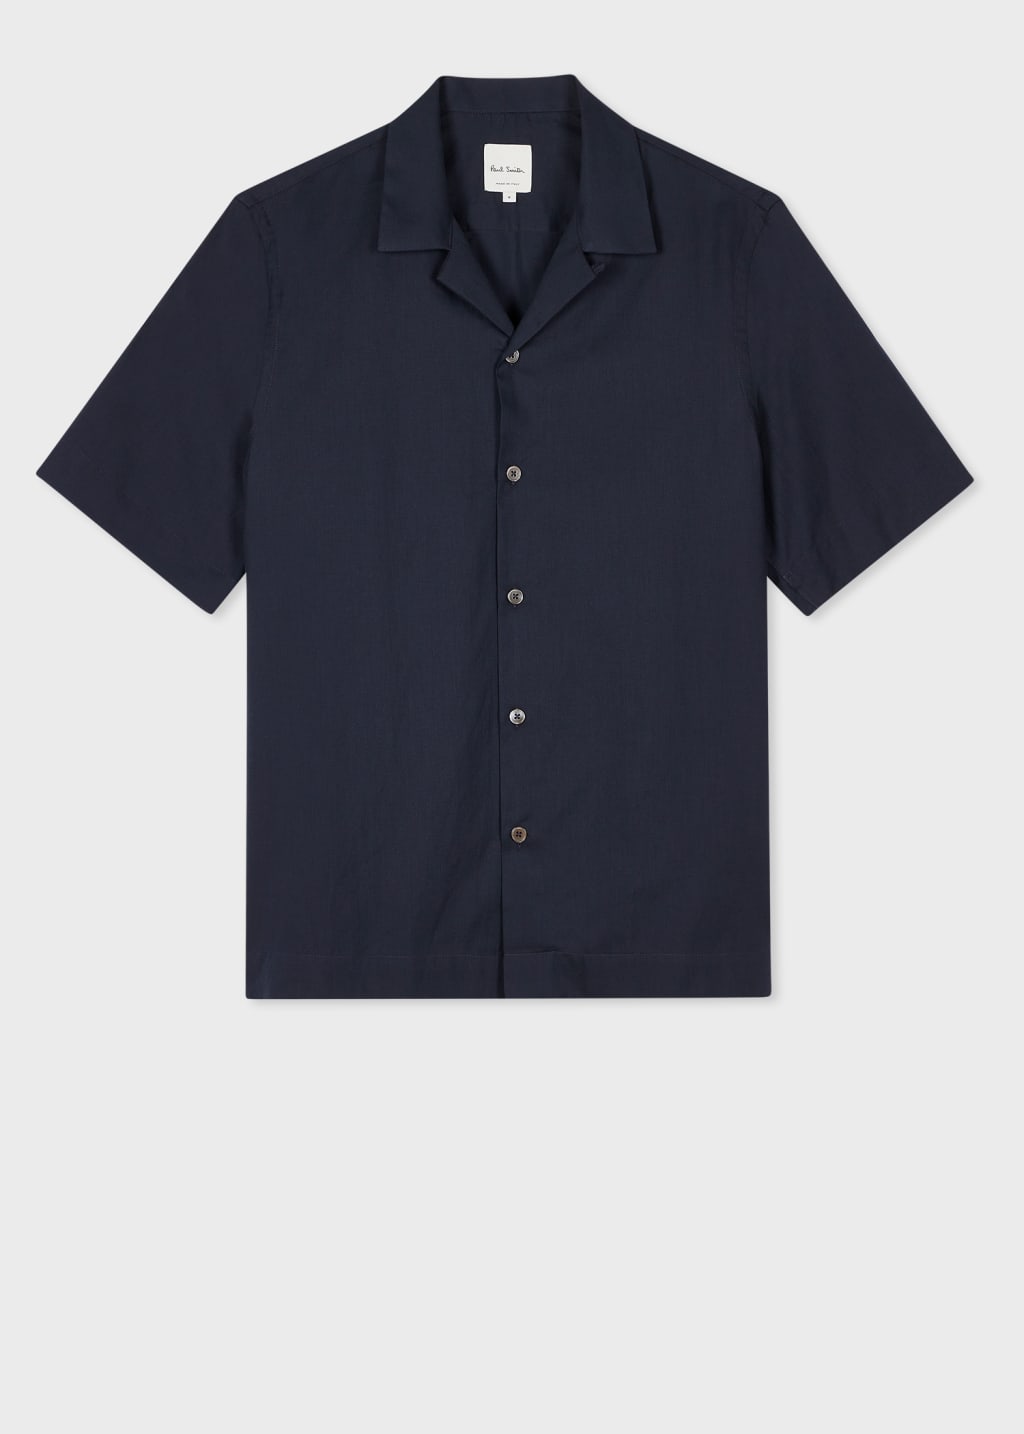 Front View - Navy Cotton Flannel Short Sleeve Shirt Paul Smith